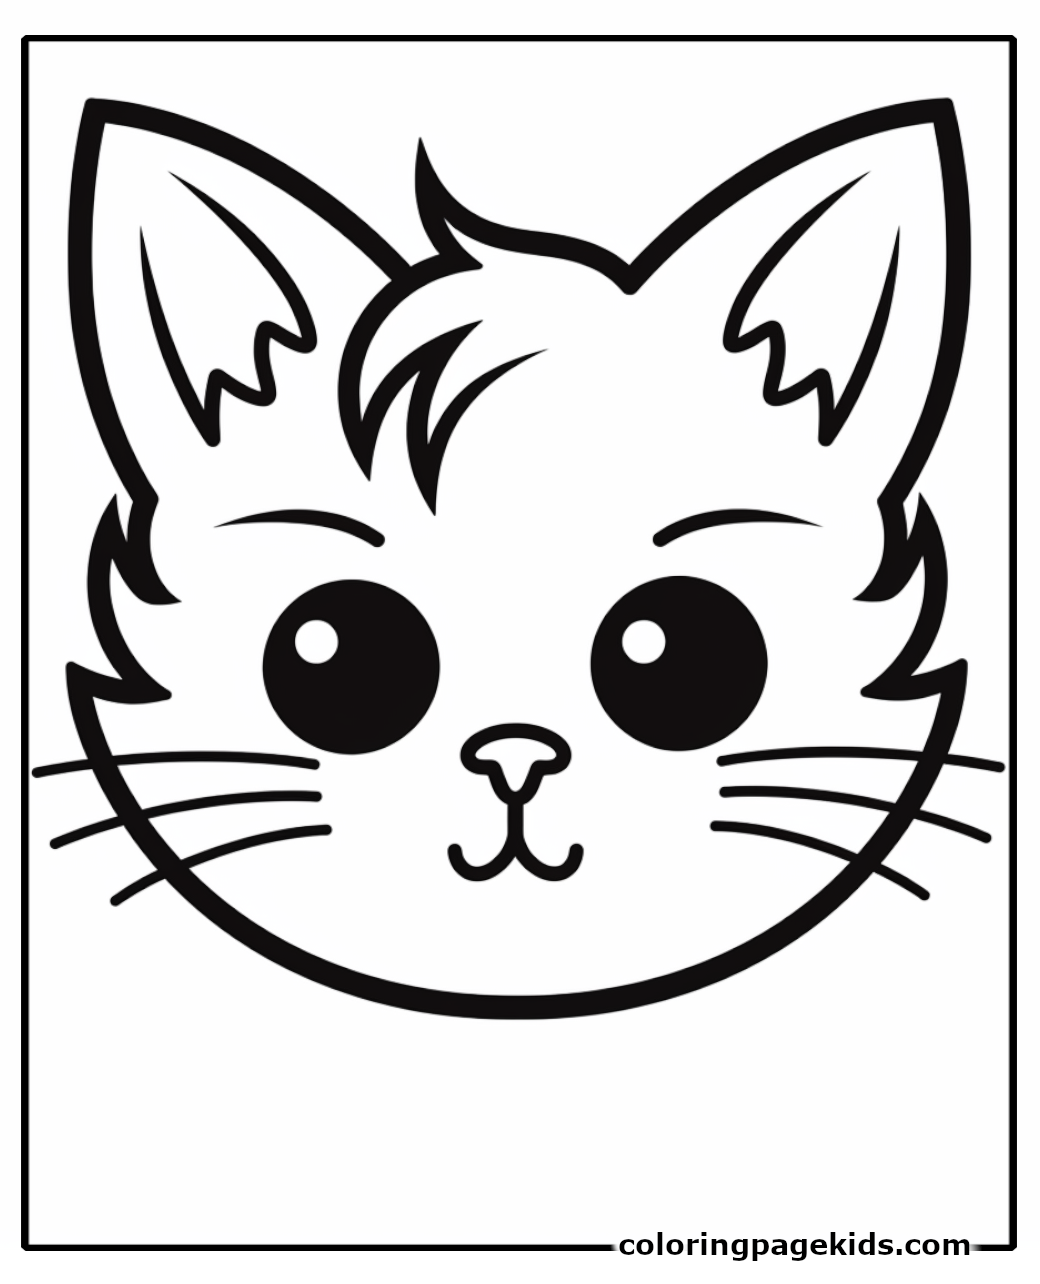 14 Printable Cat Mask Templates for All Ages